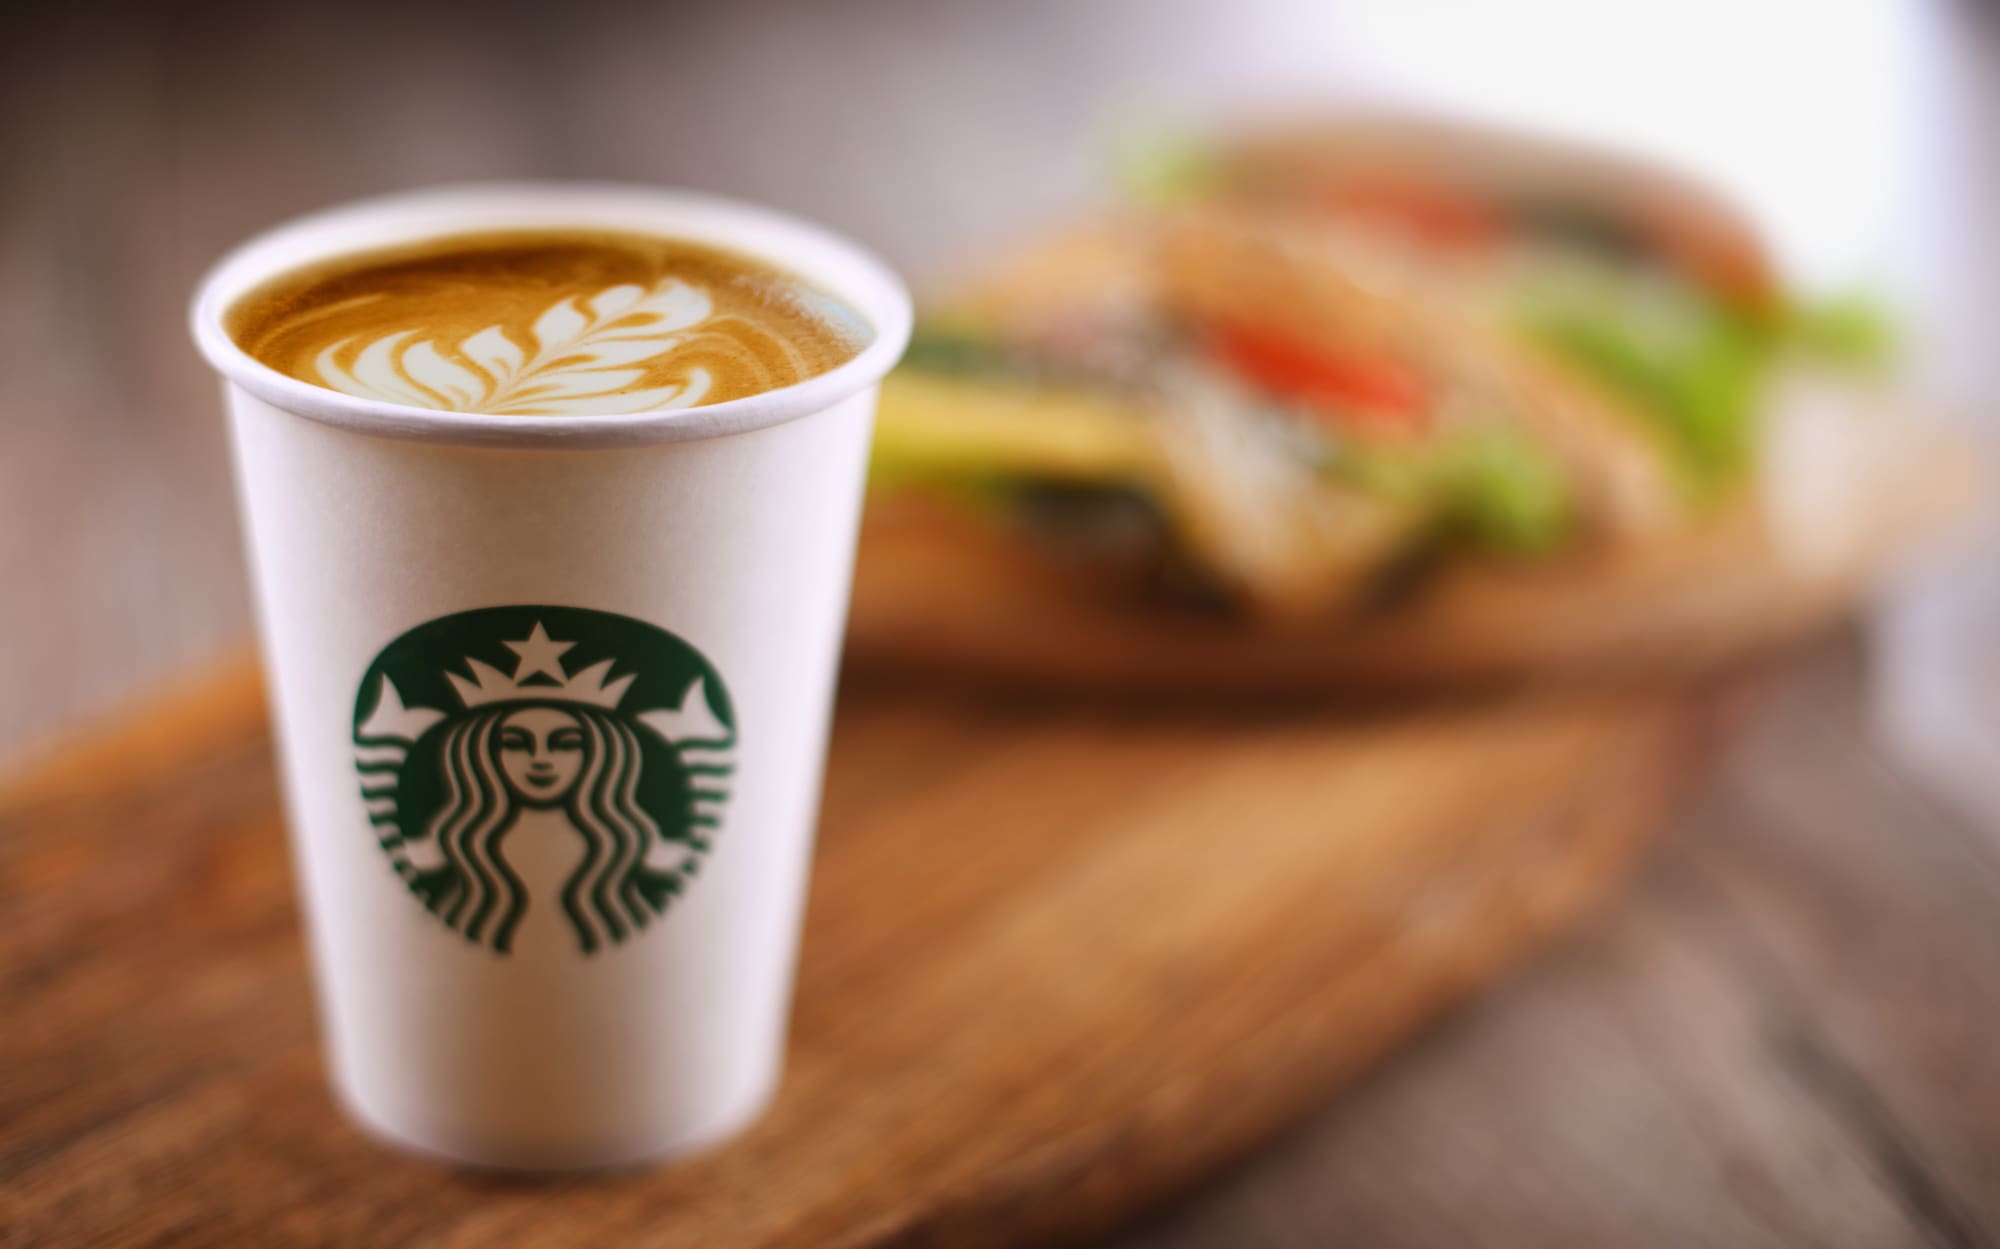 I Was a Starbucks Barista: Here Are the Secret Fall Menu Items You've Never Heard Of